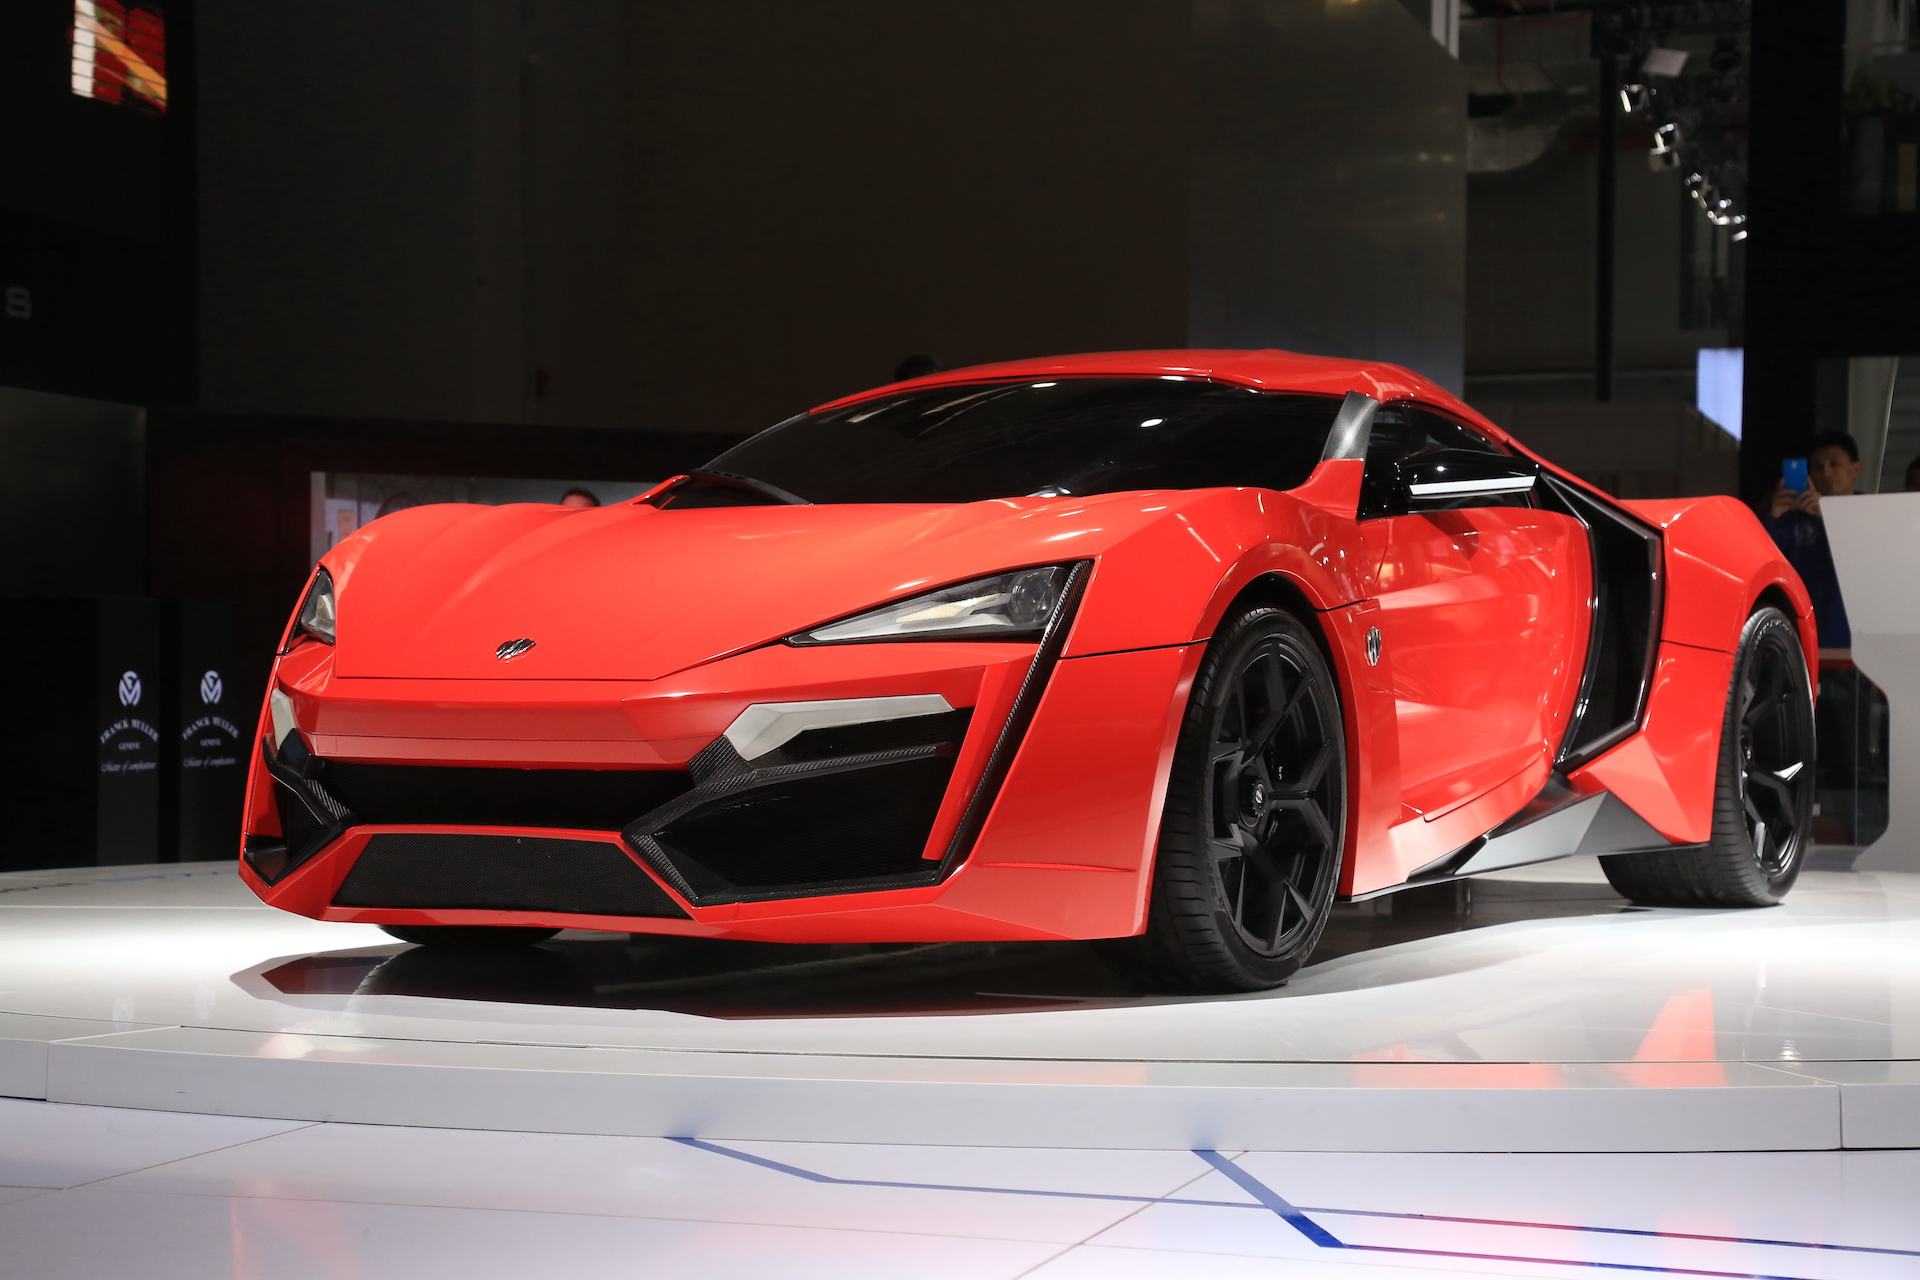 Ultra-Rare $3.4 Million Lykan Hypersport From Fast and Furious 7 Goes up for Auction